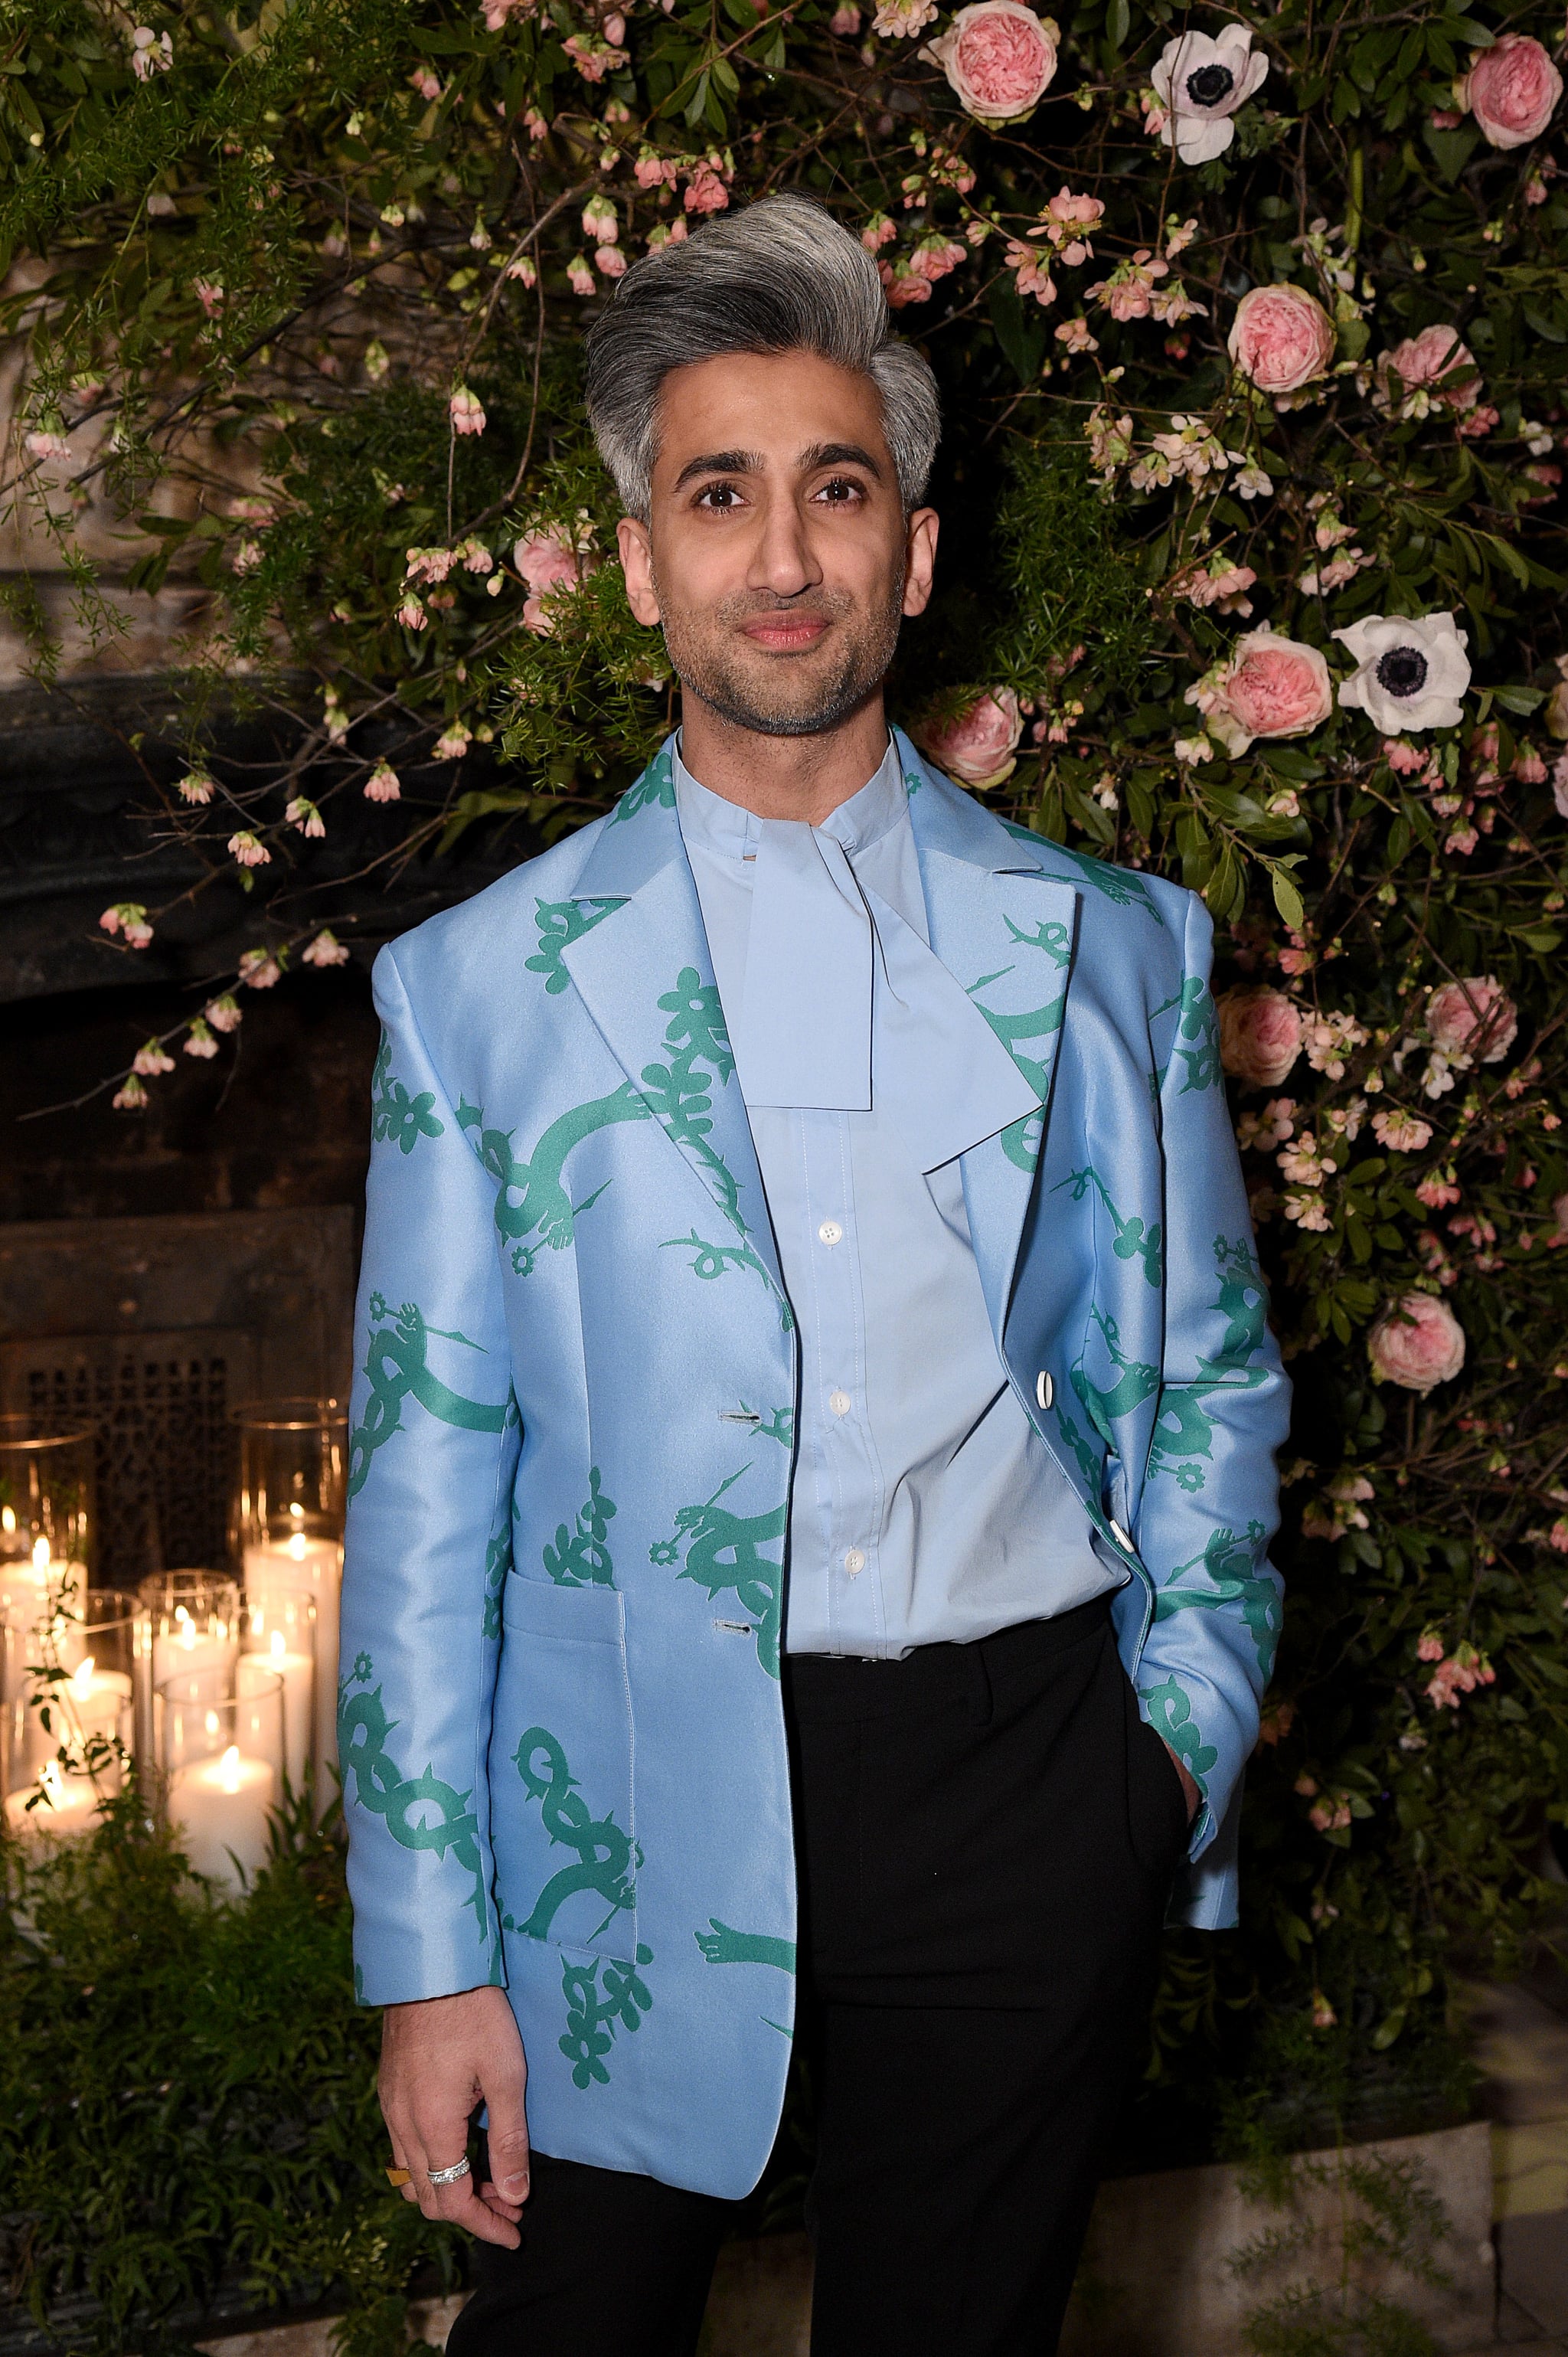 NEW YORK, NEW YORK - FEBRUARY 05: Tan France attends the Netflix and Net-A-Porter x Next In Fashion launch event on February 05, 2020 in New York City. (Photo by Bryan Bedder/Getty Images)